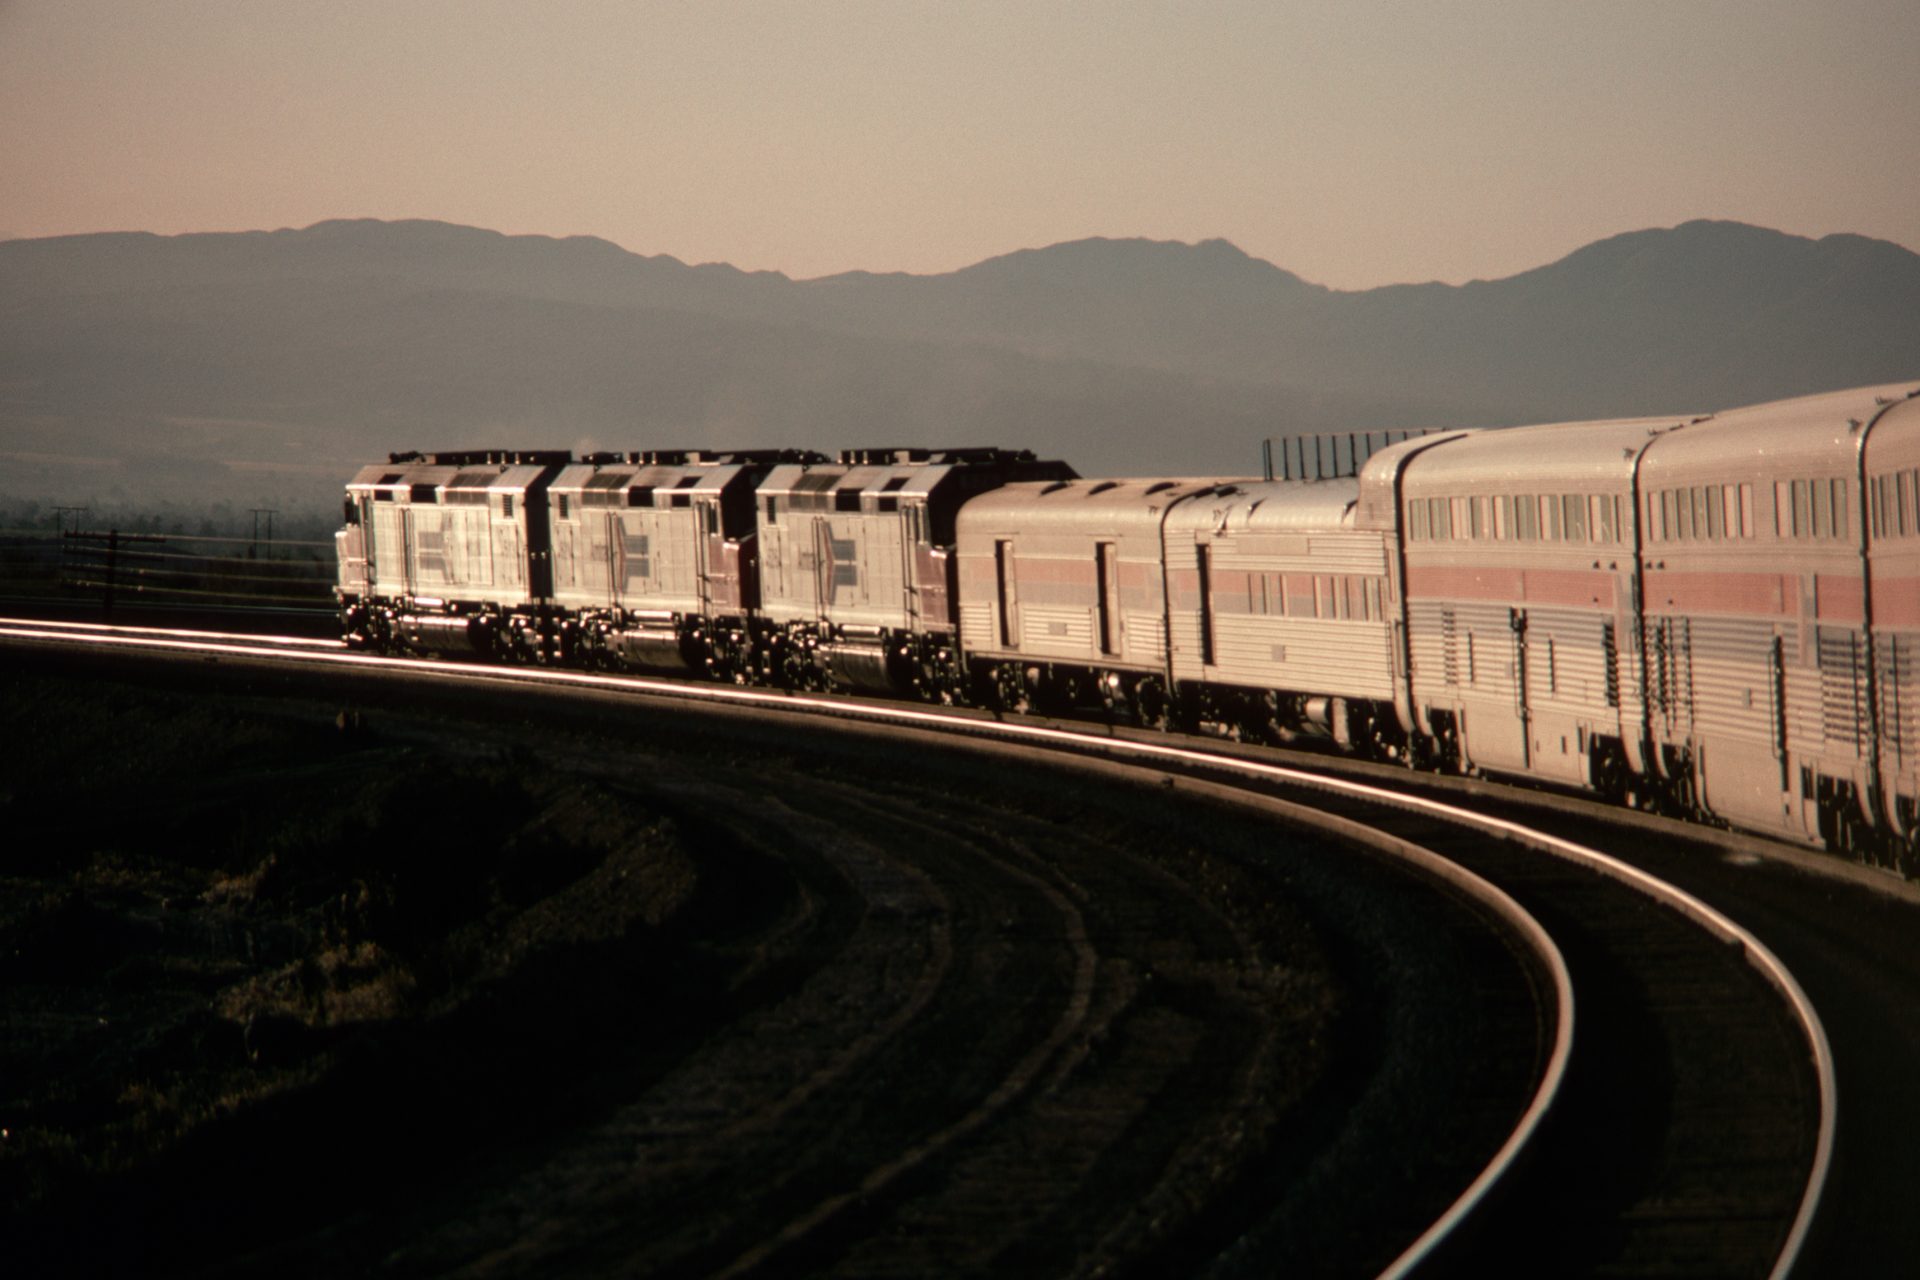 New trains can’t operate on America’s old rails